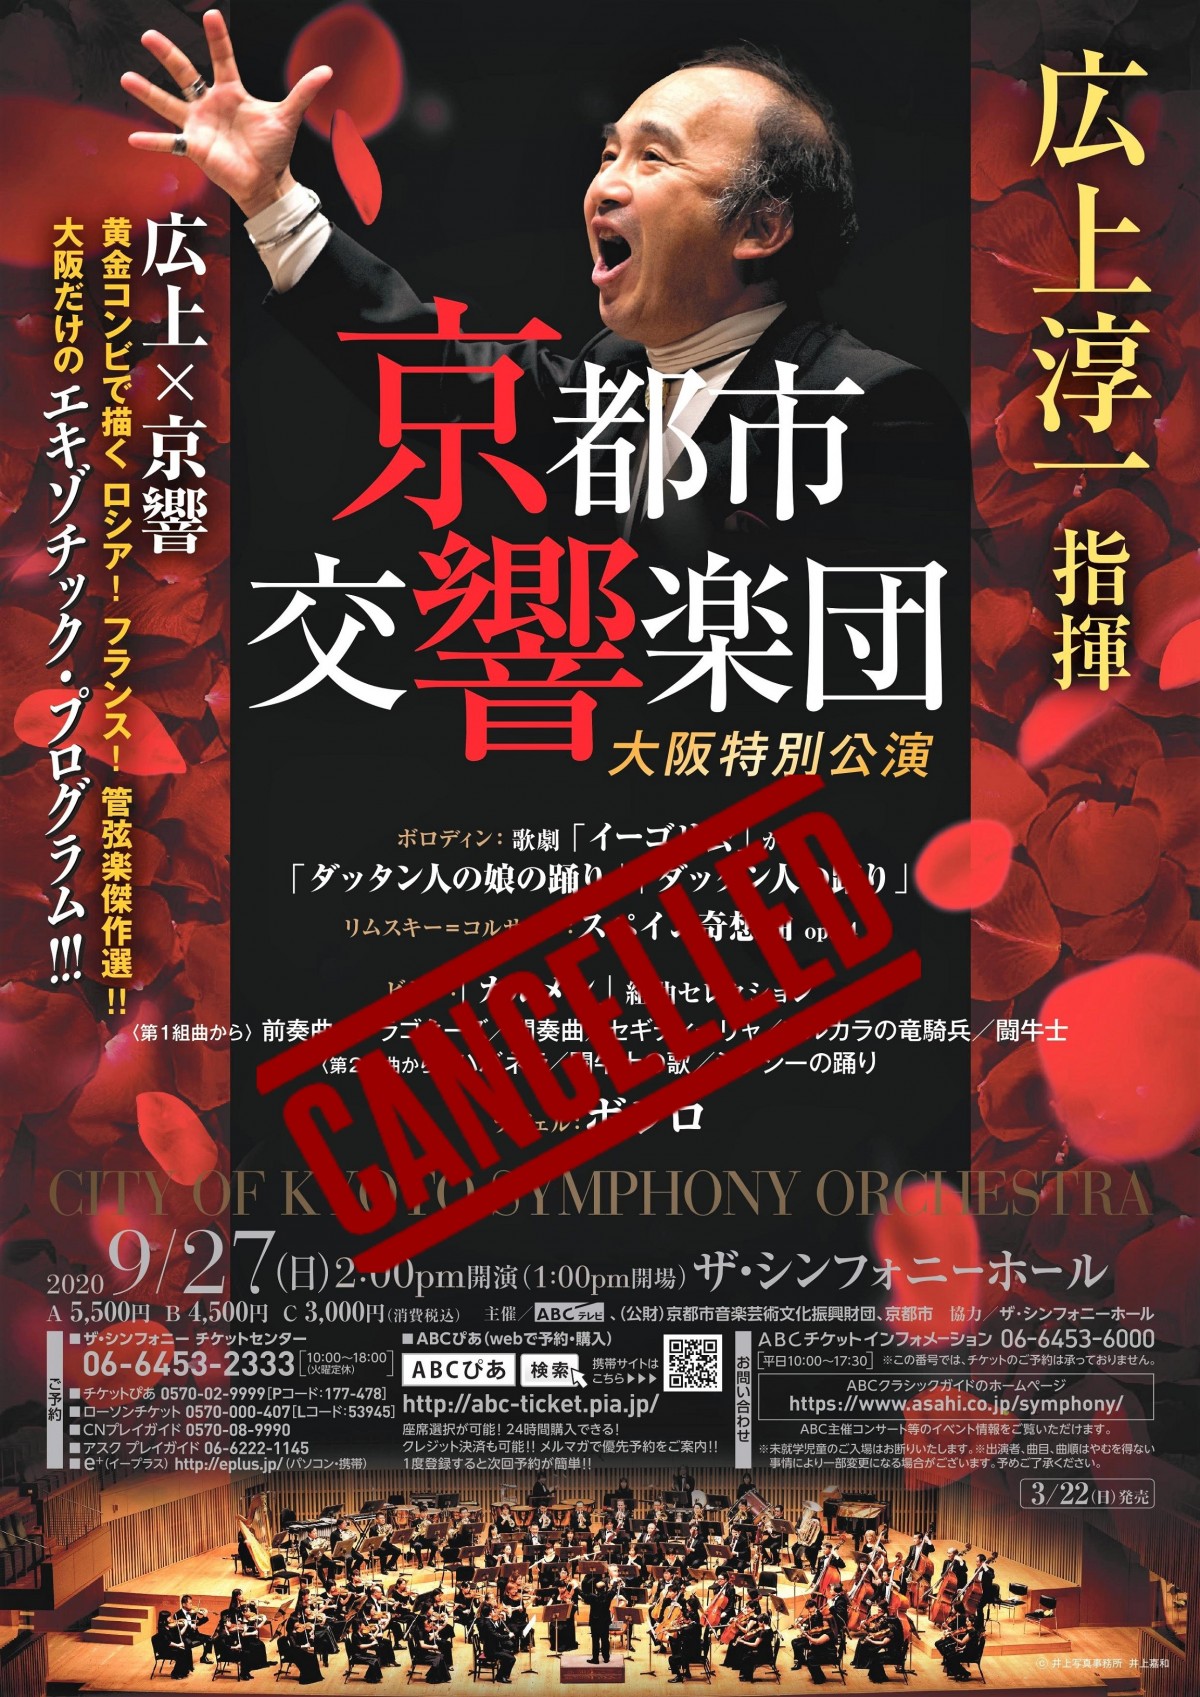 ＜CANCELLED＞The Special Concert in Osaka